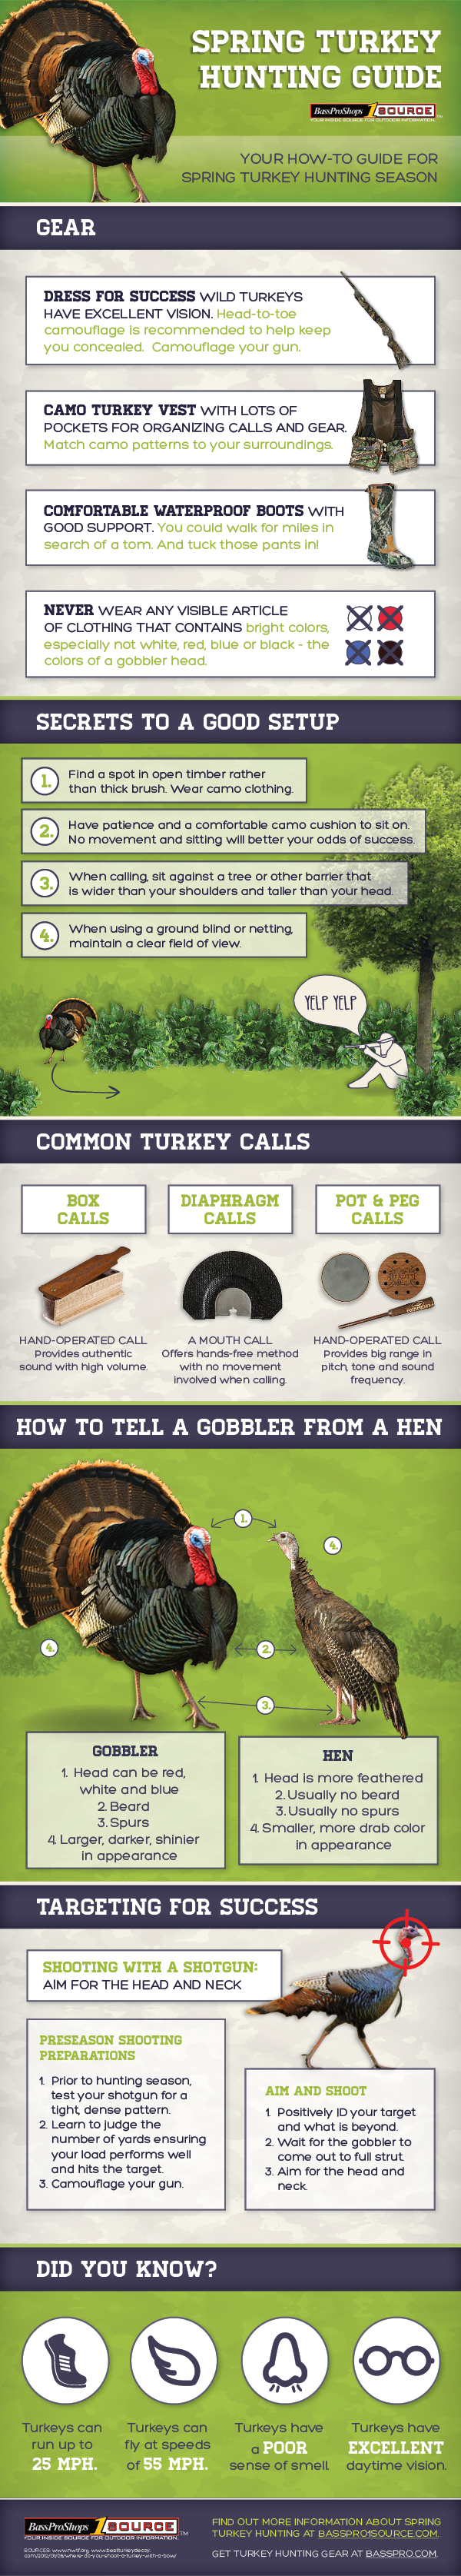 Spring Turkey Hunting Guide from Bass Pro Shops